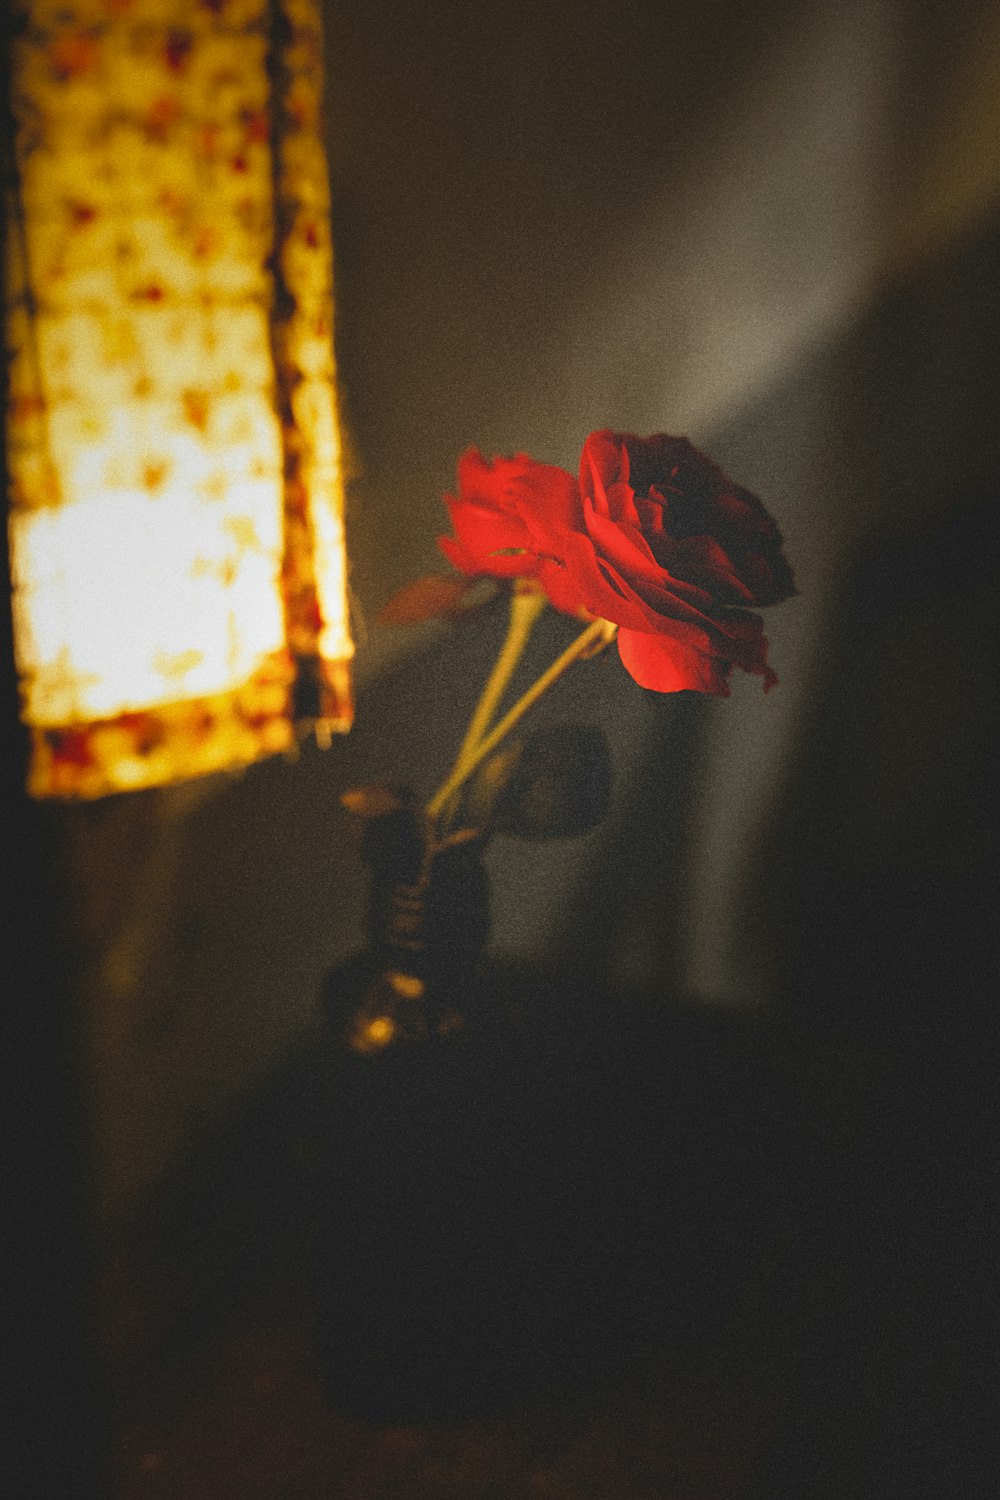 a single red rose sitting in a vase next to a lamp